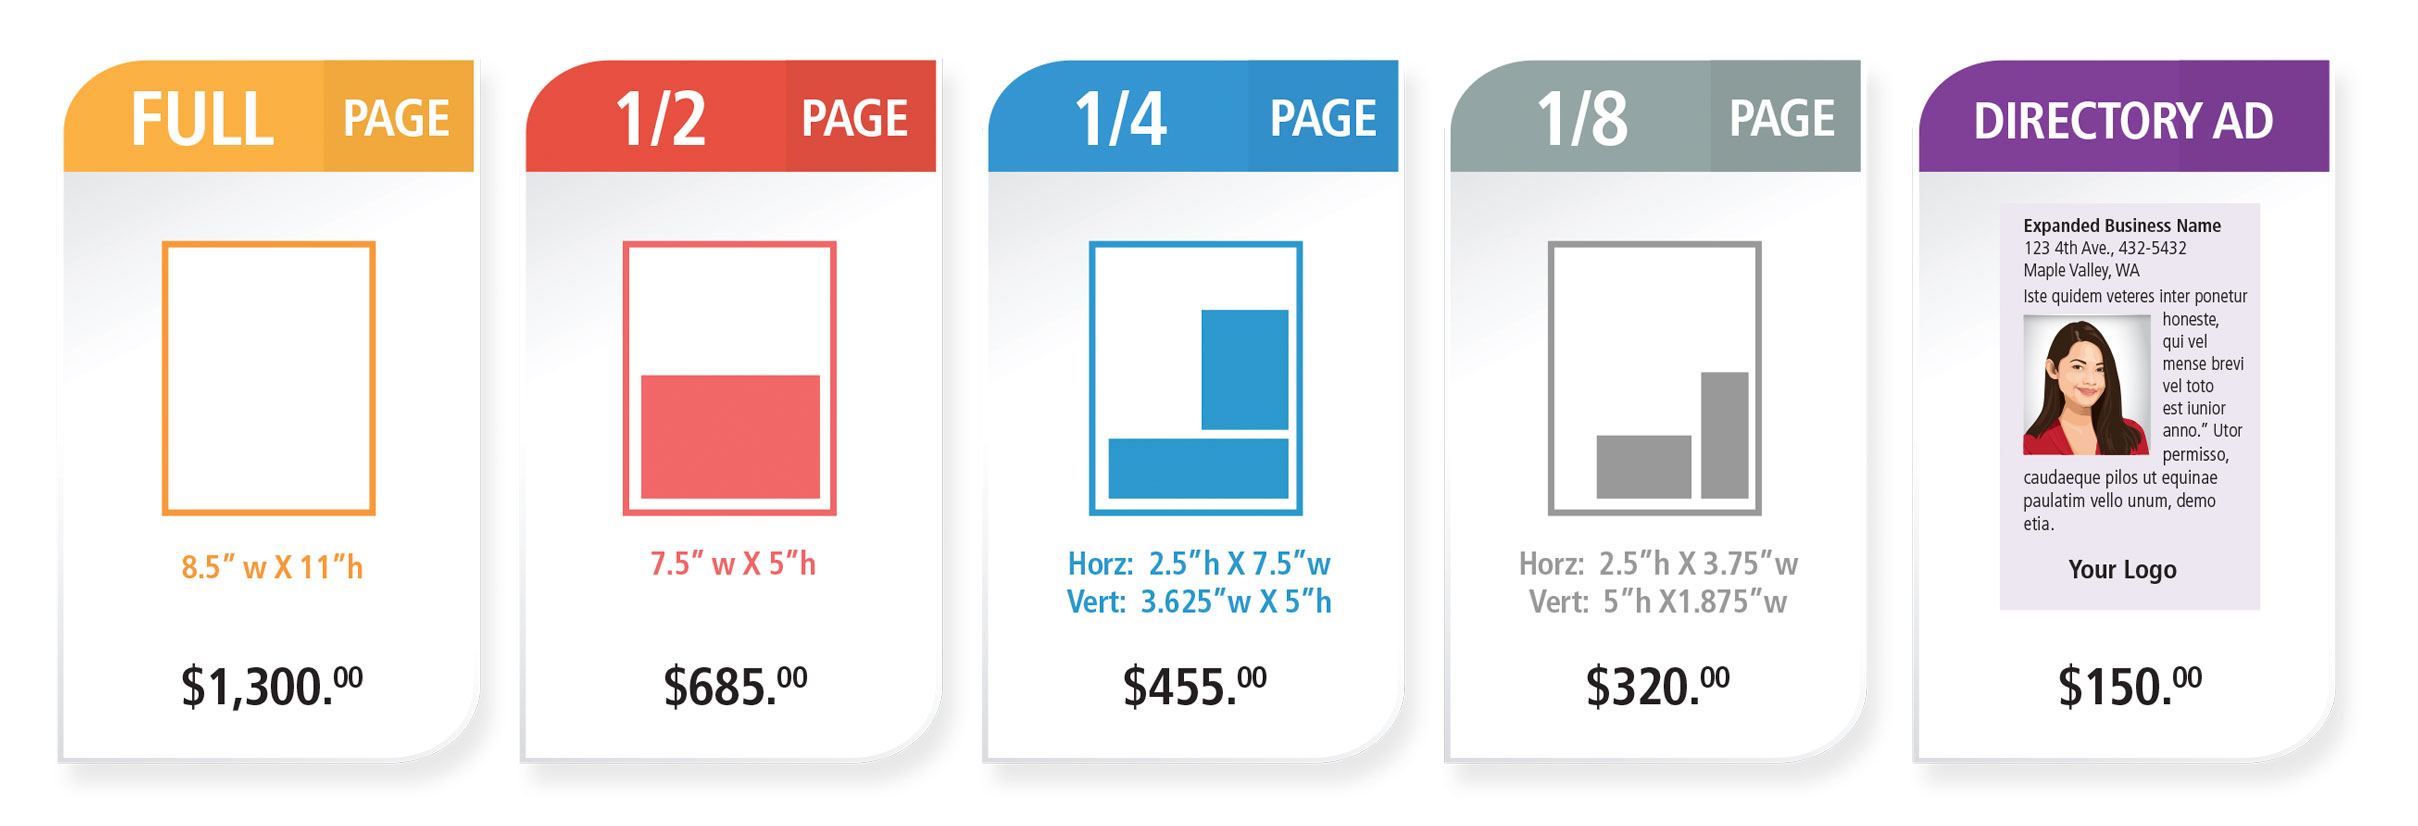 visitor guide ad sizes and pricing